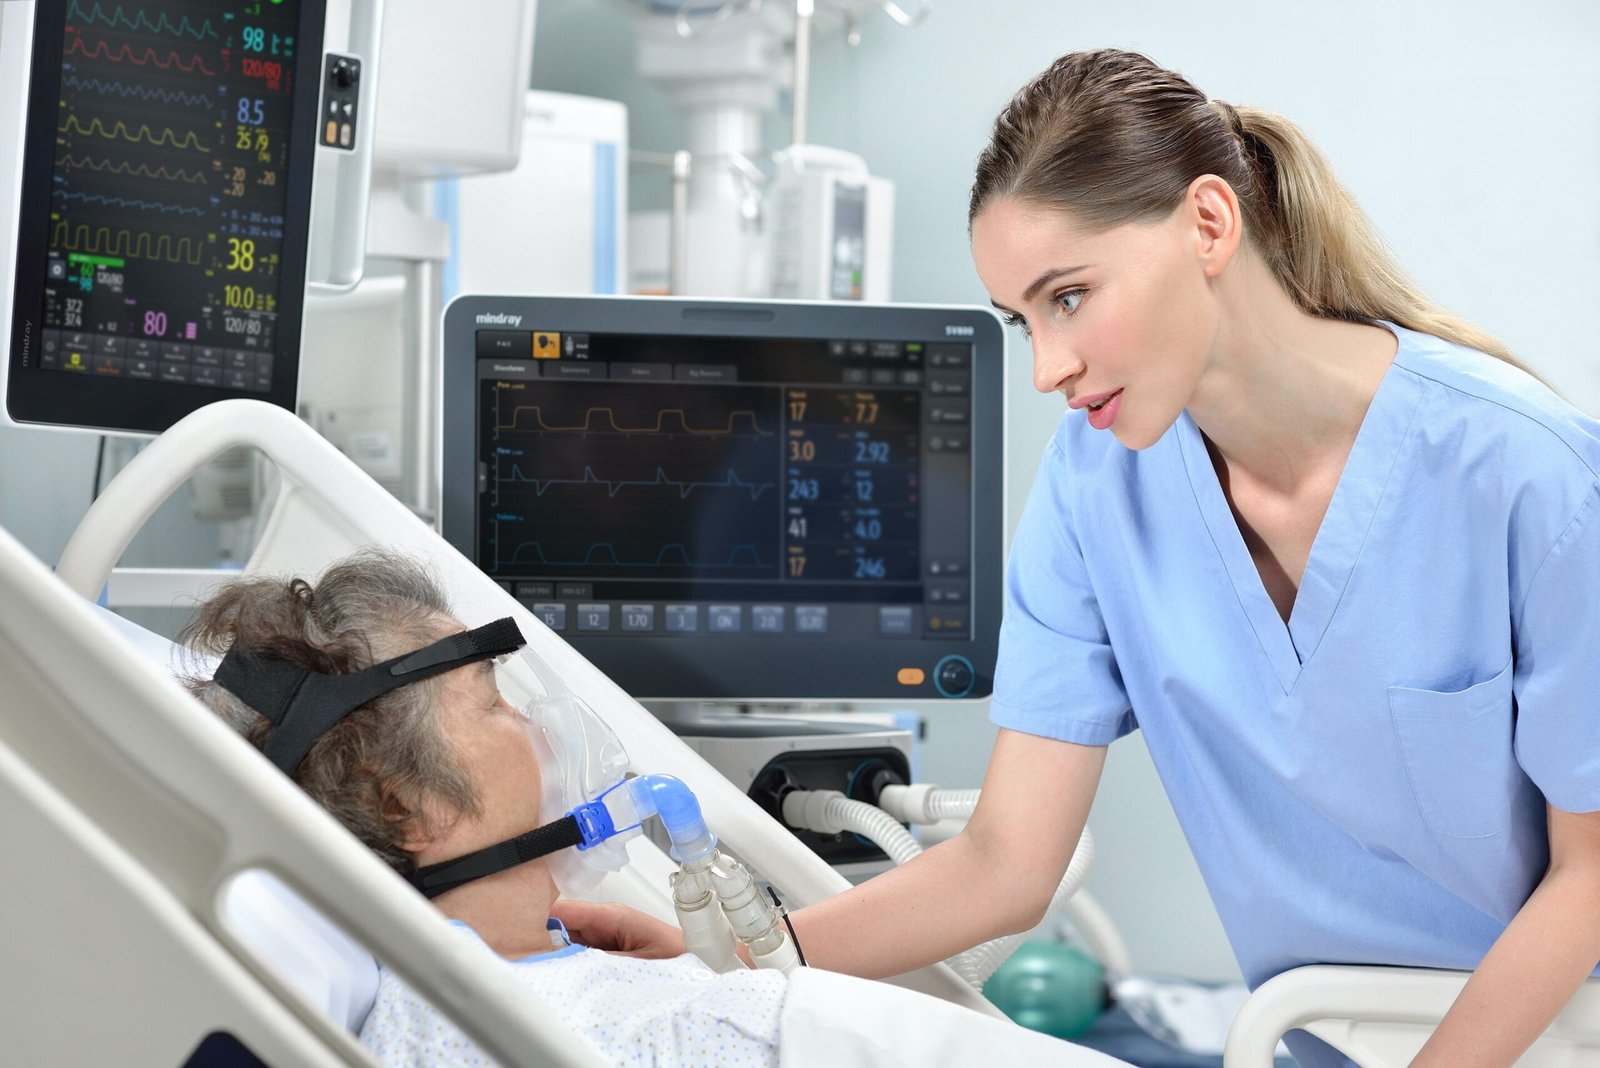 Shortened antibiotic treatment for ventilator associated pneumonia in ICU patients just as effective as standard course